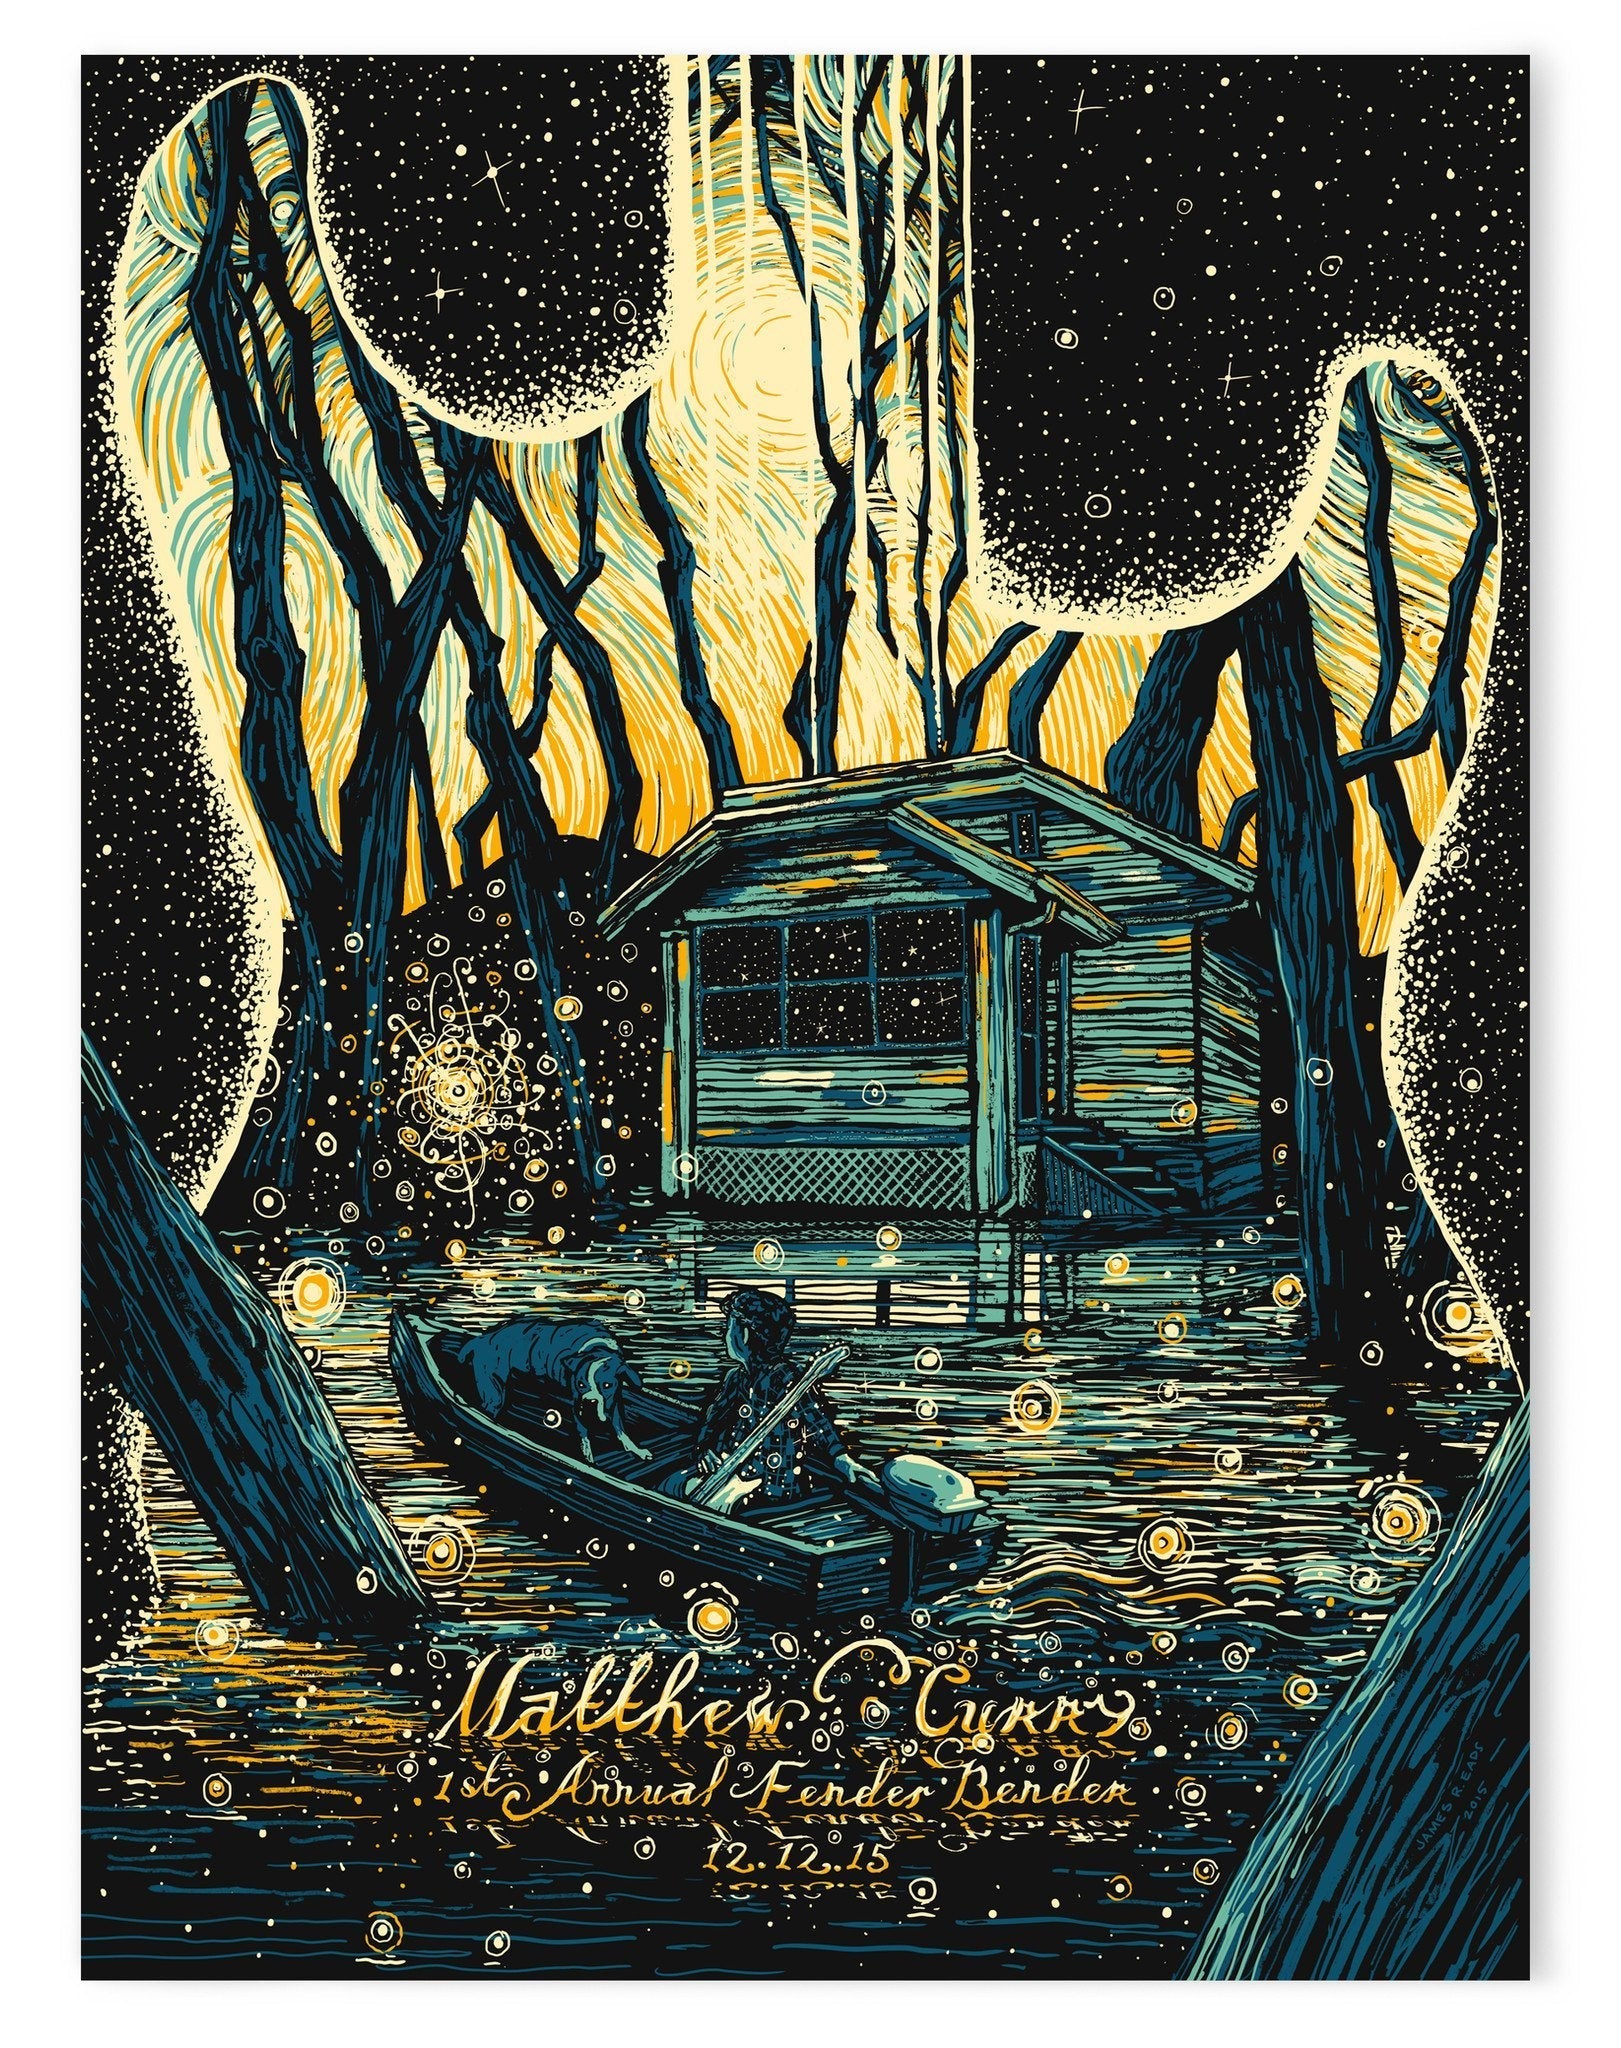 Coming Home (Limited Edition of 25) Print James R. Eads